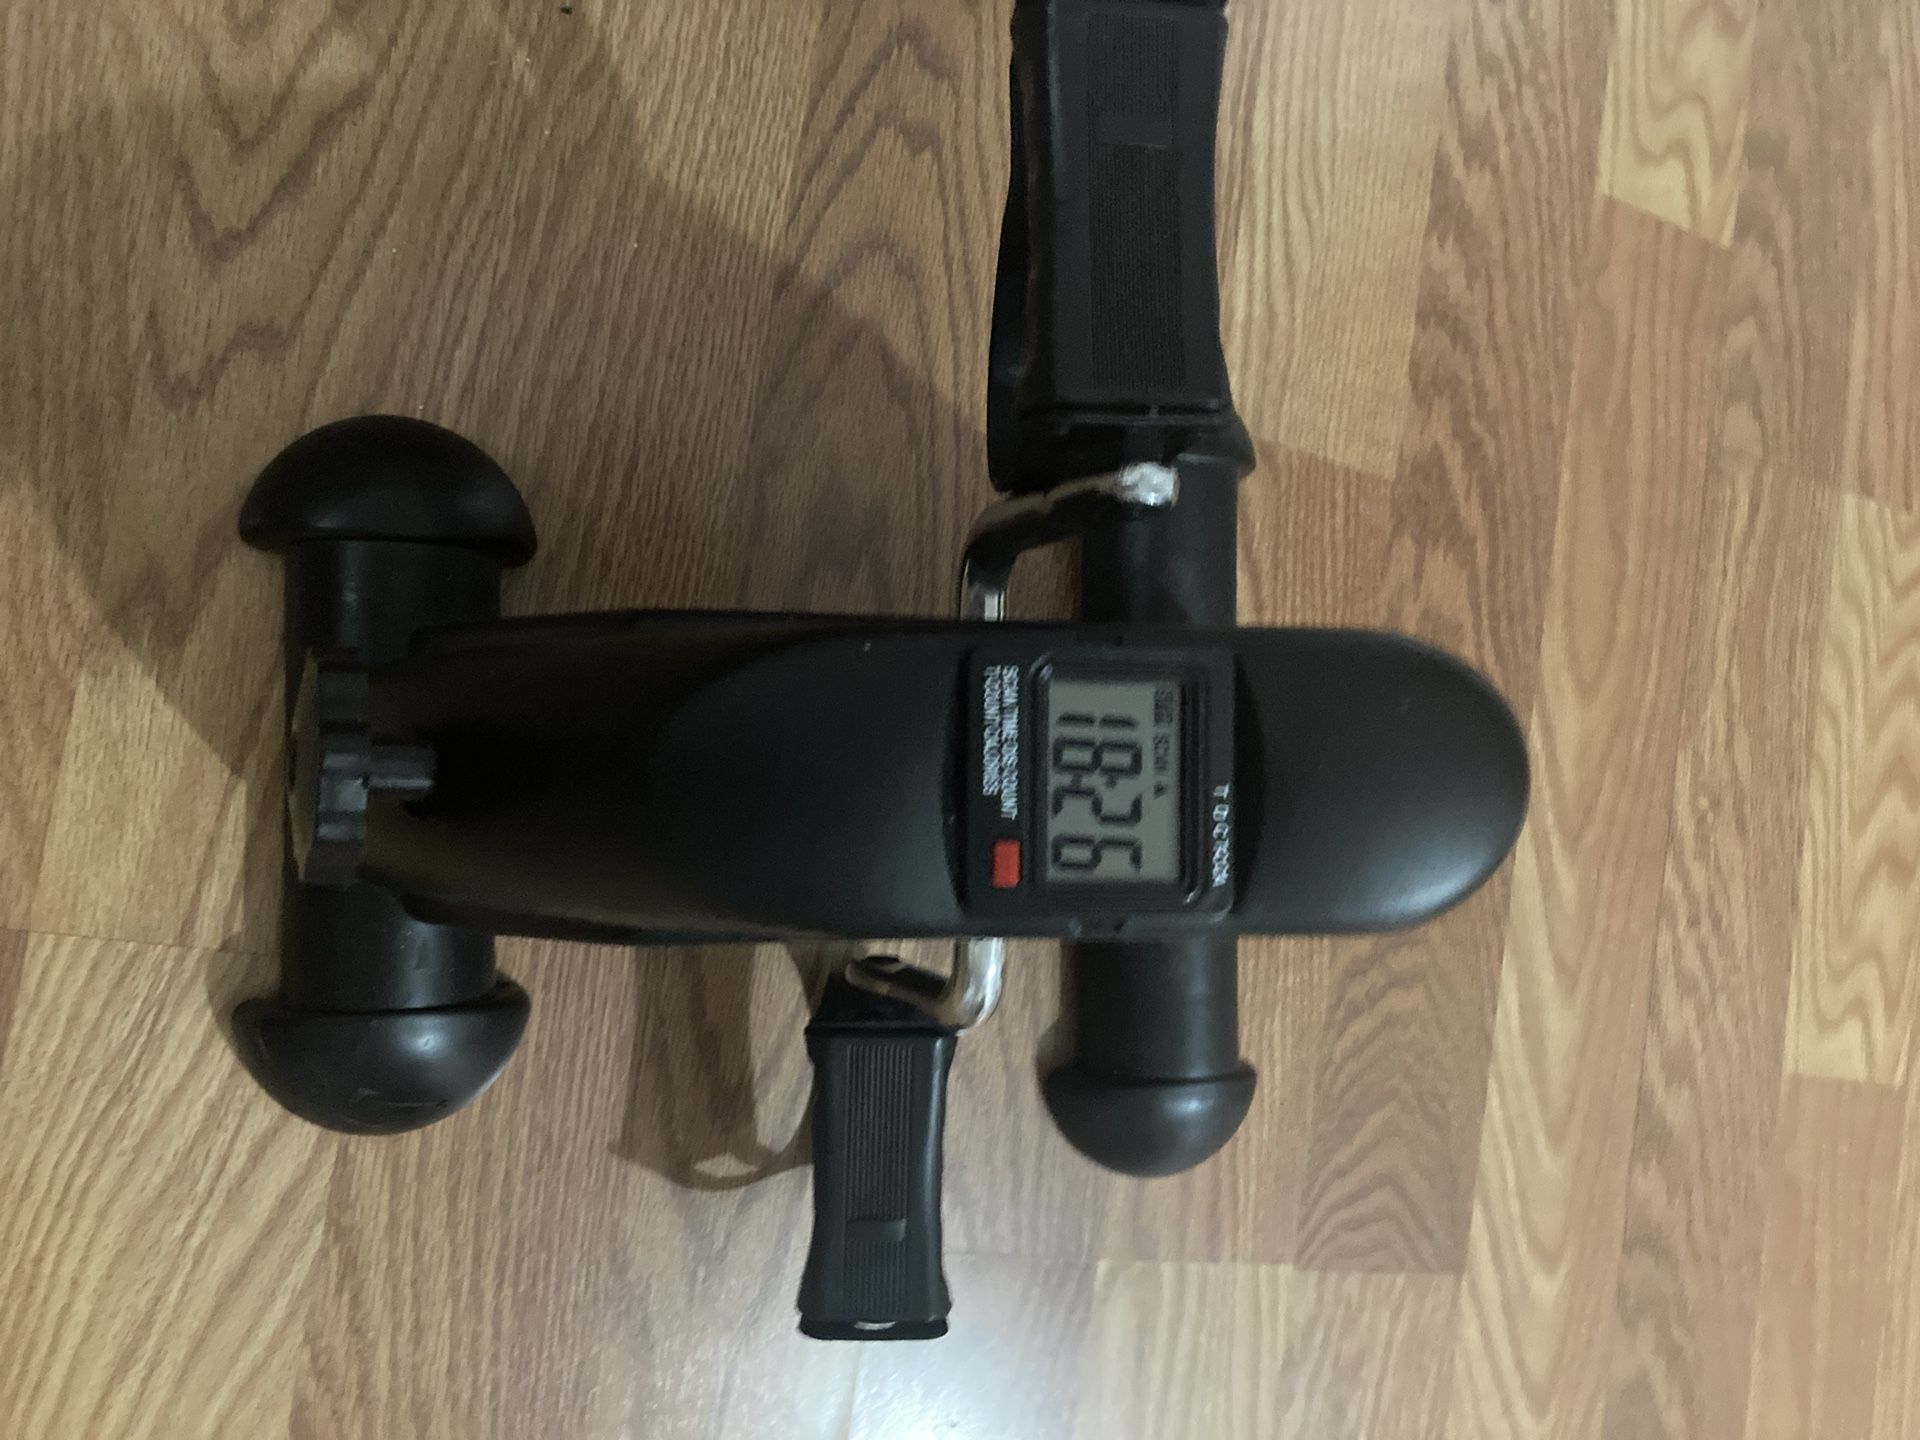 Exercise Pedals Bike